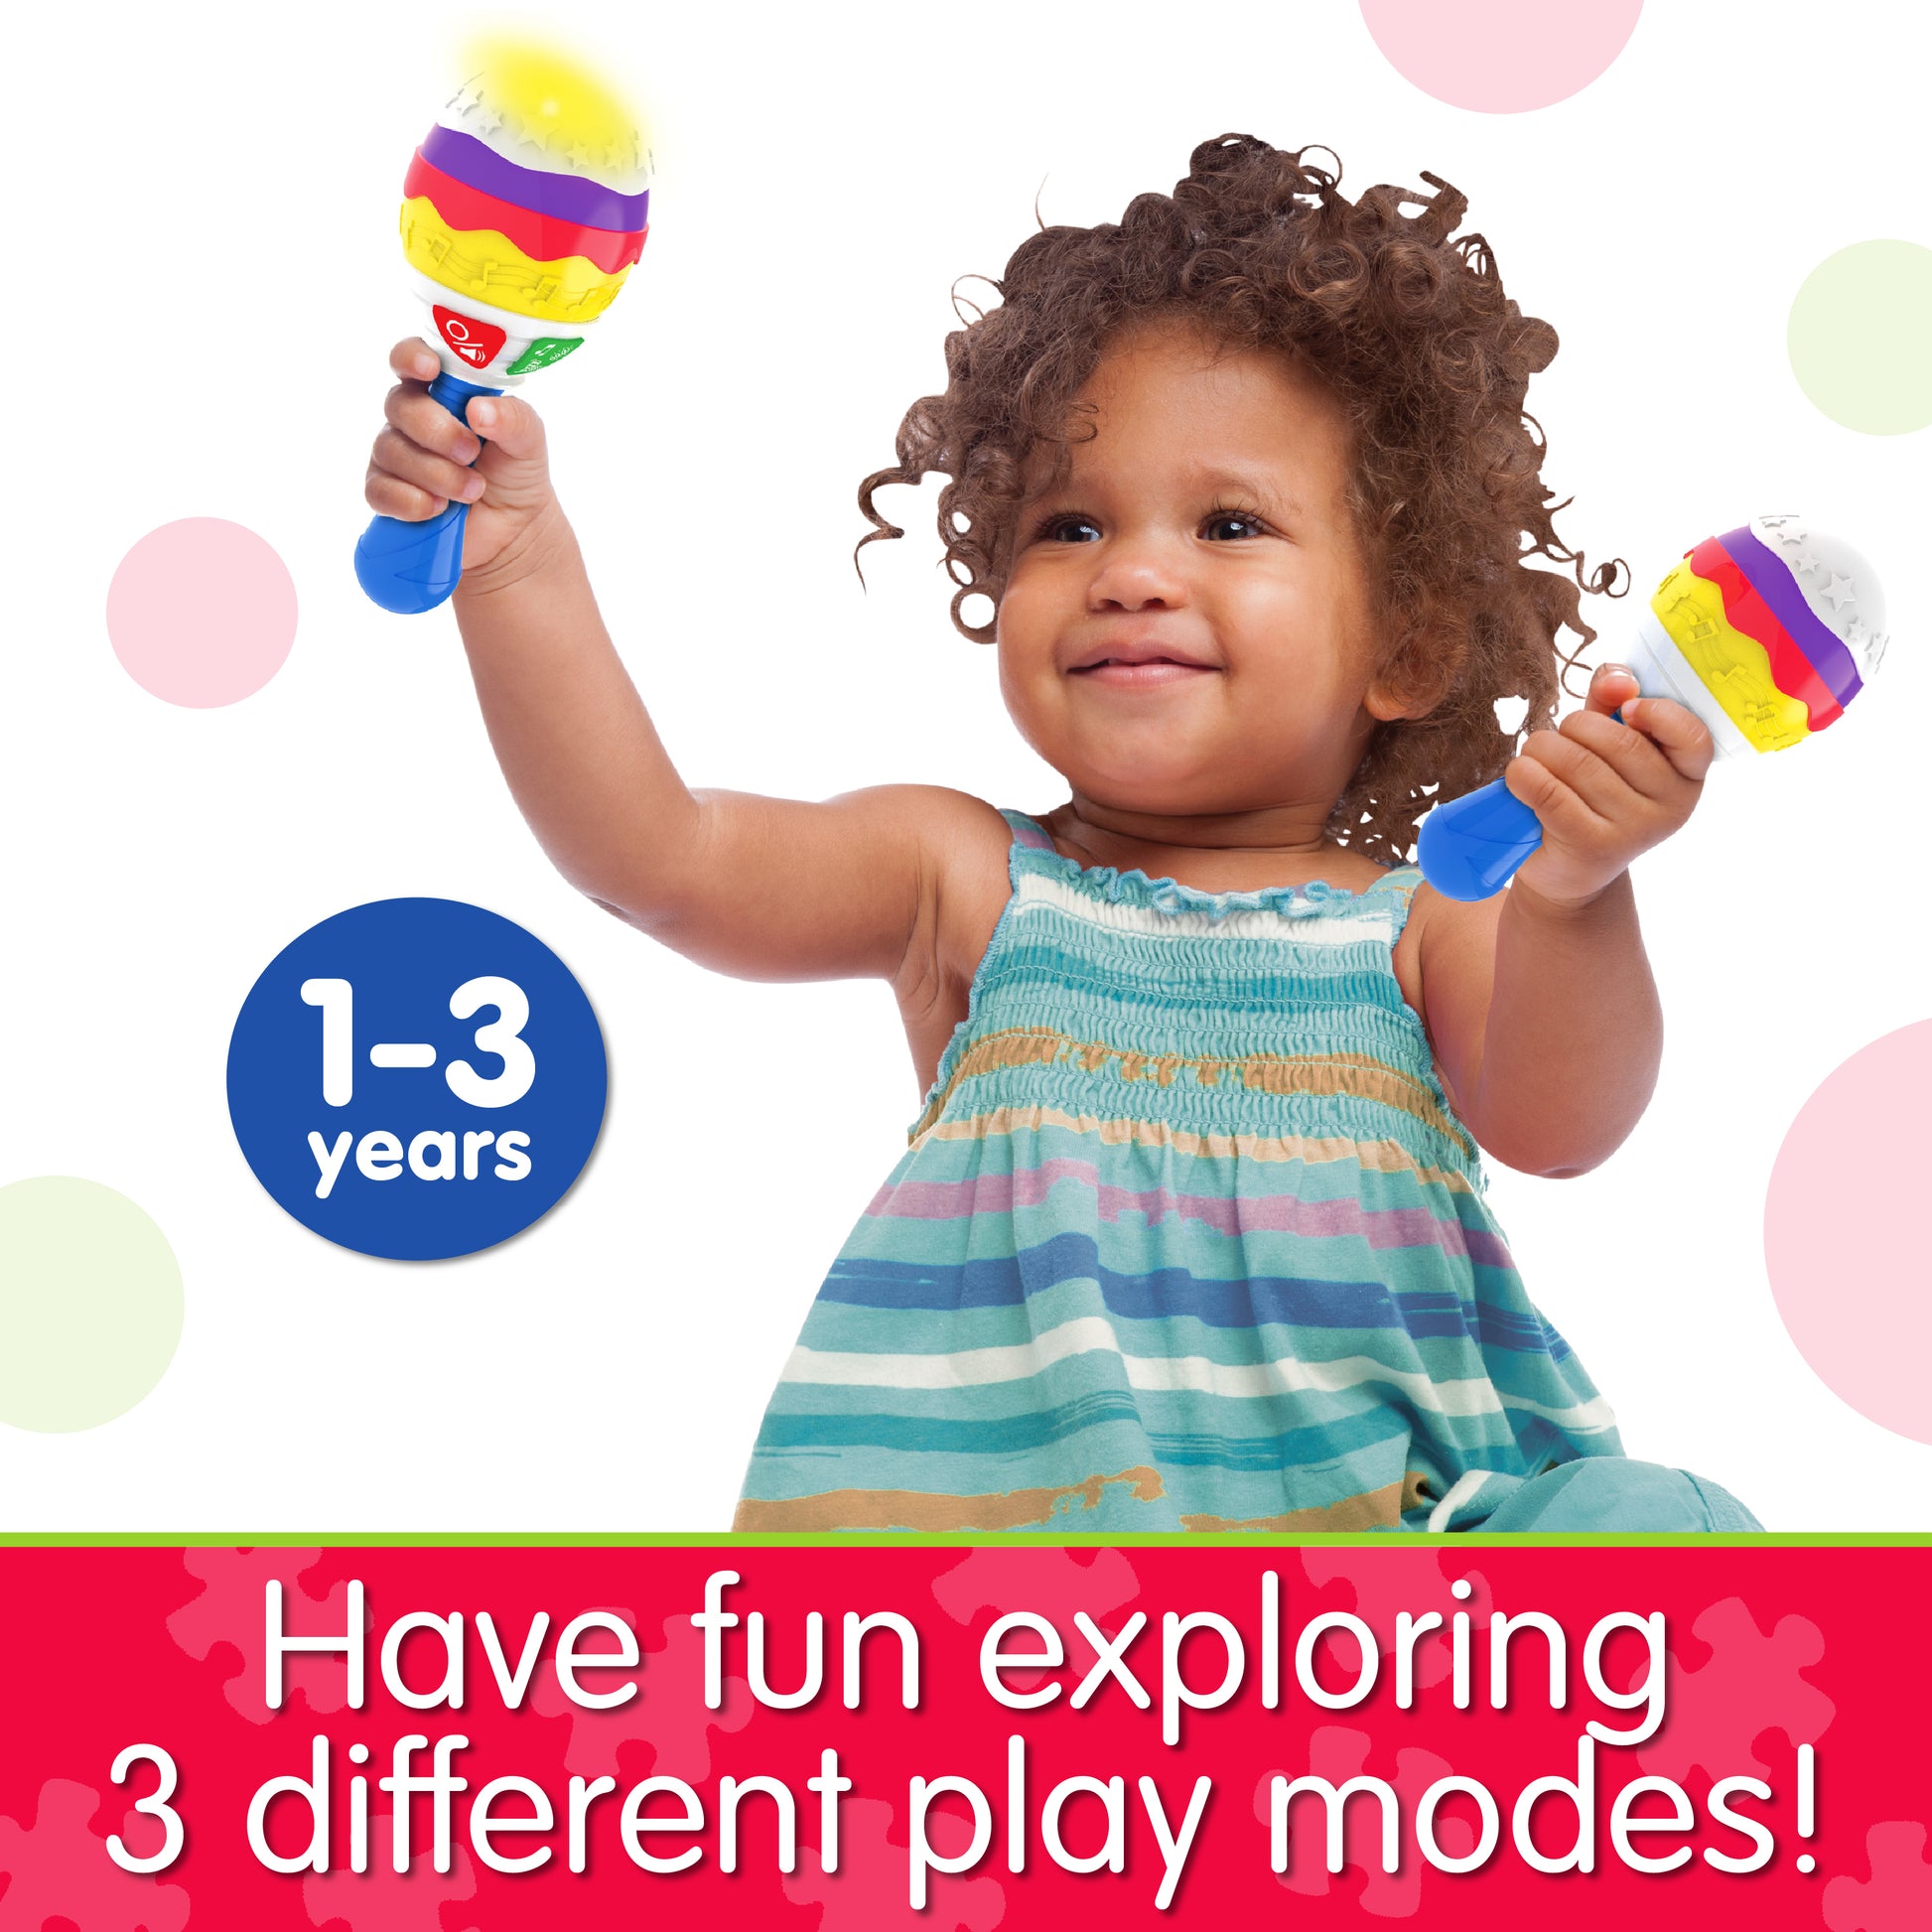 Infographic of little girl playing with Little Music Maracas that says, "Have fun exploring 3 different play modes!"